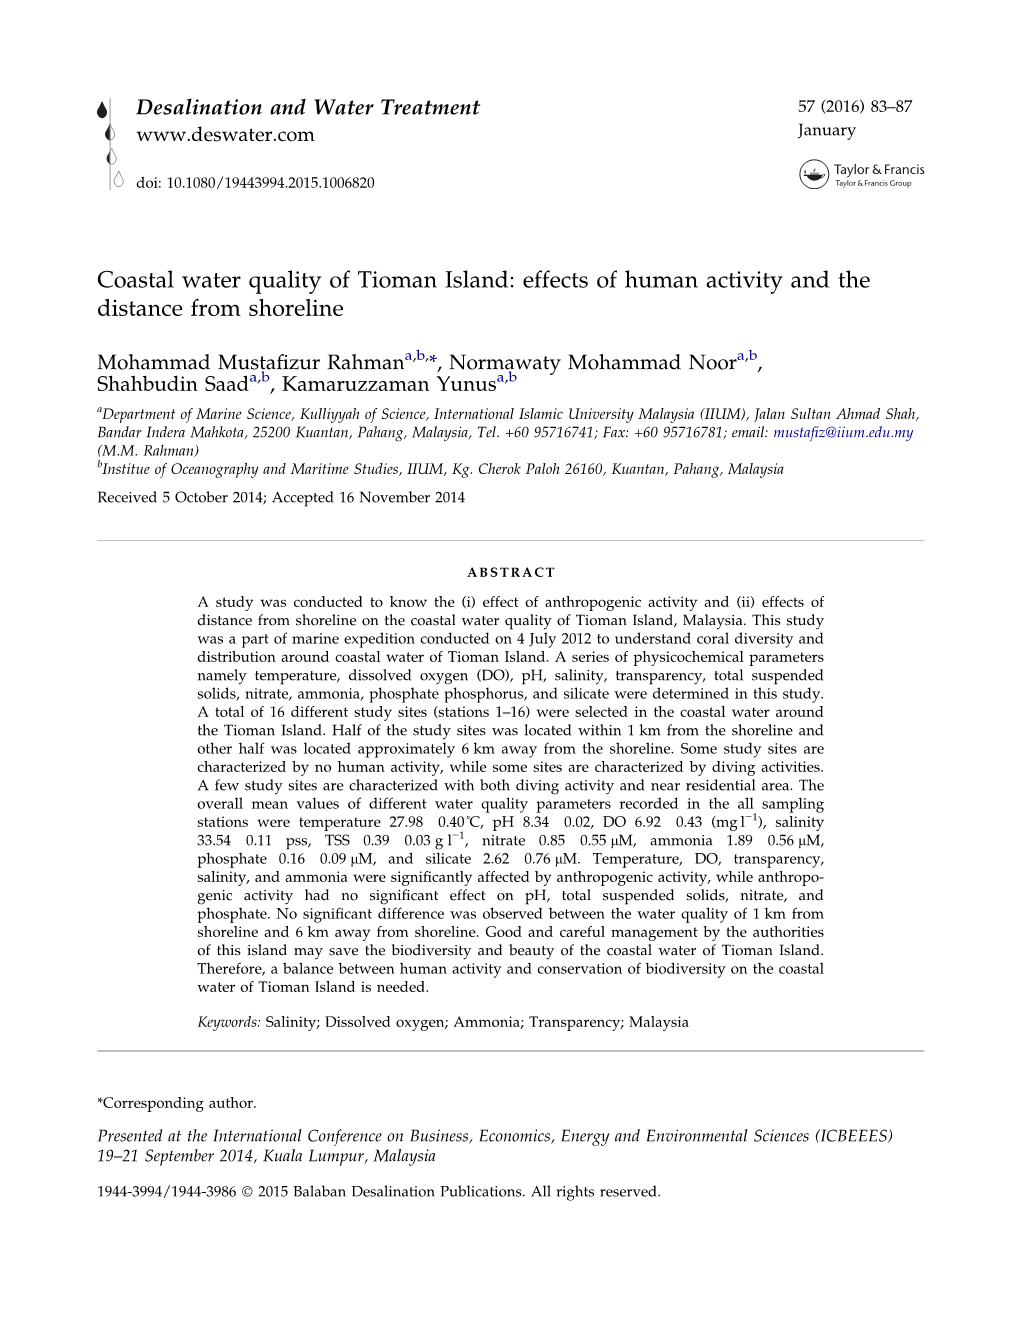 Coastal Water Quality of Tioman Island: Effects of Human Activity and the Distance from Shoreline